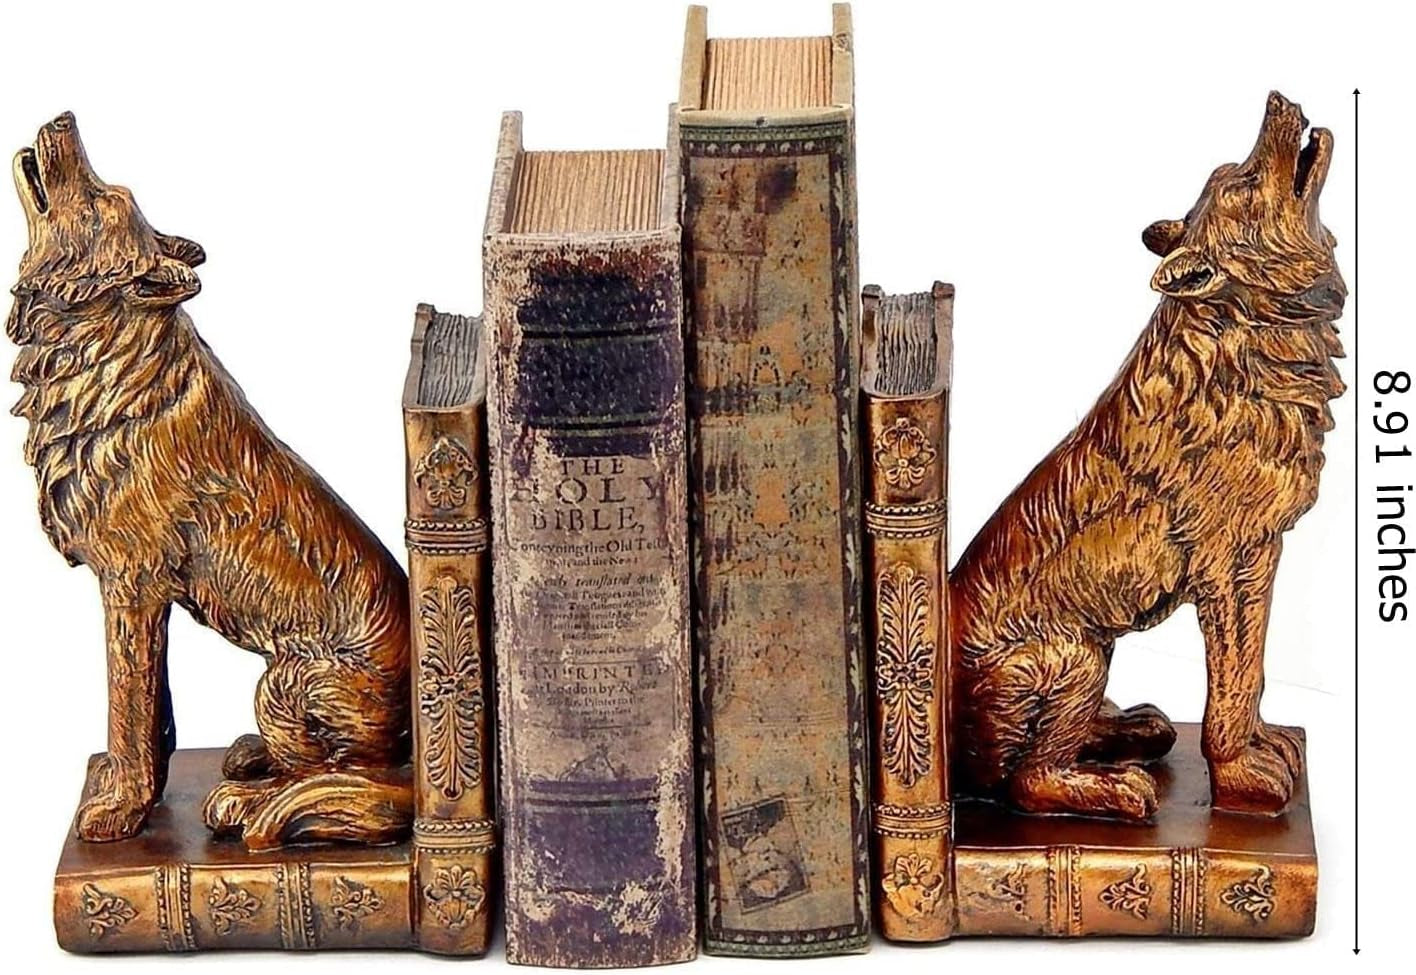 26362 Decorative Bookends Howling Wolf Animal Cabin Farmhouse Vintage Bookshelf Home Decor Tabletop Shelves Nonskid Heavy Book Stoppers 9 Inch